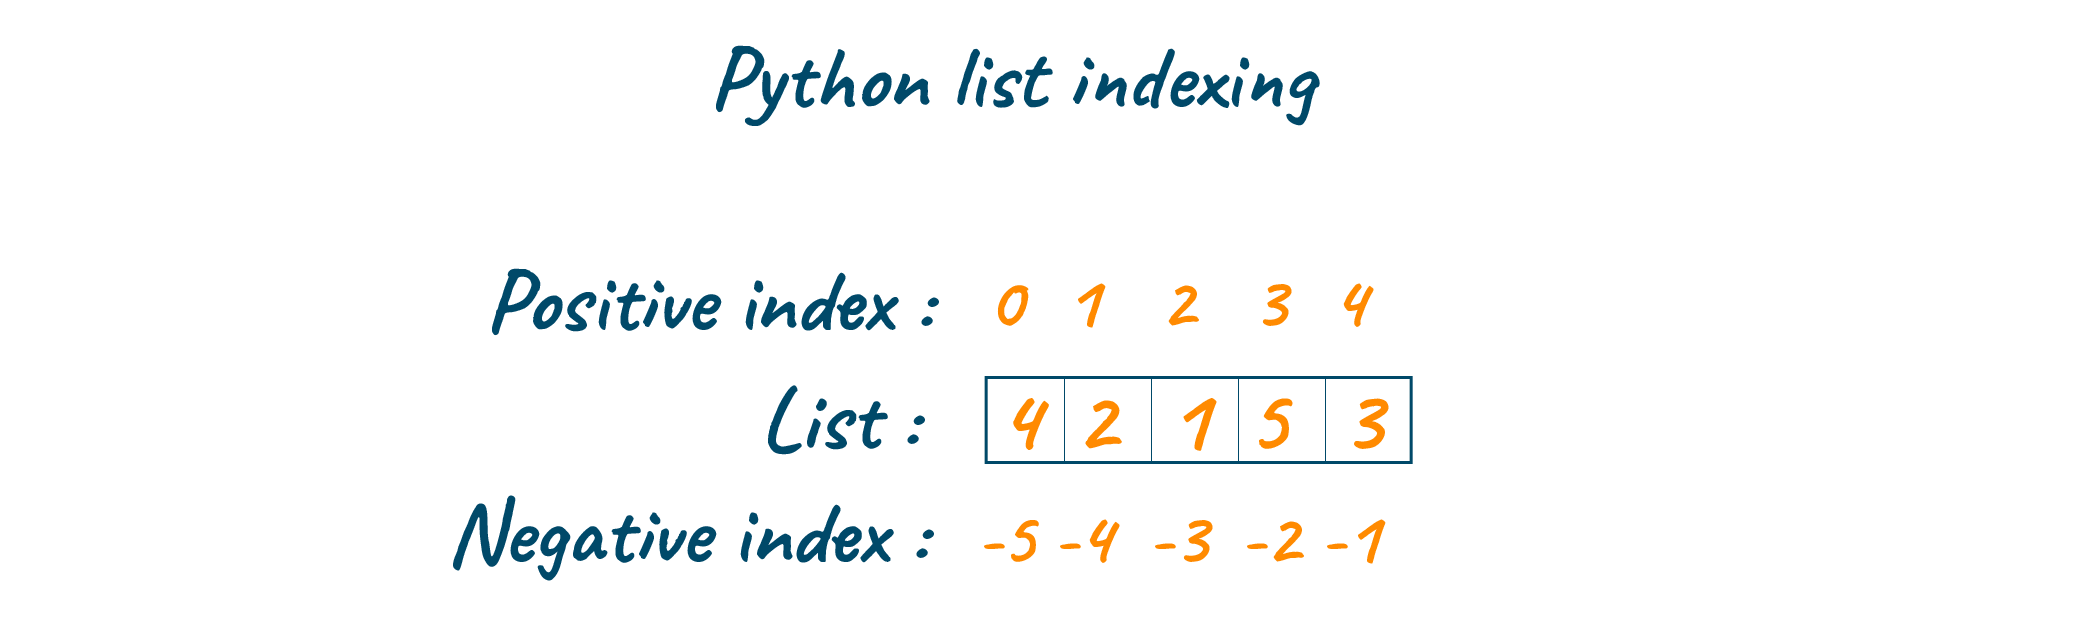 Python list indexing example